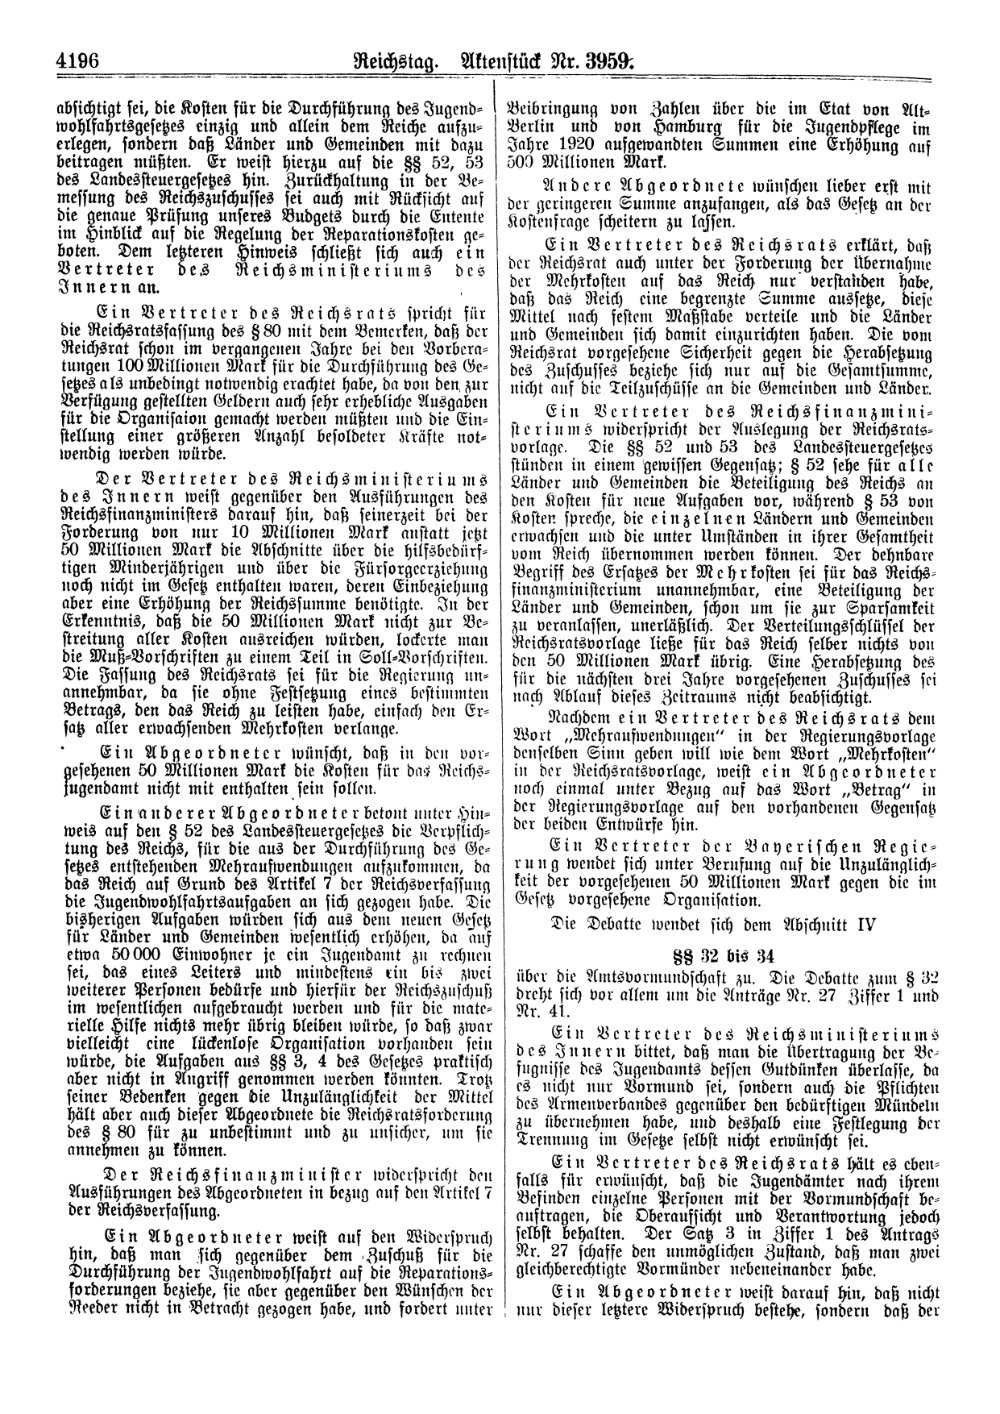 Scan of page 4196